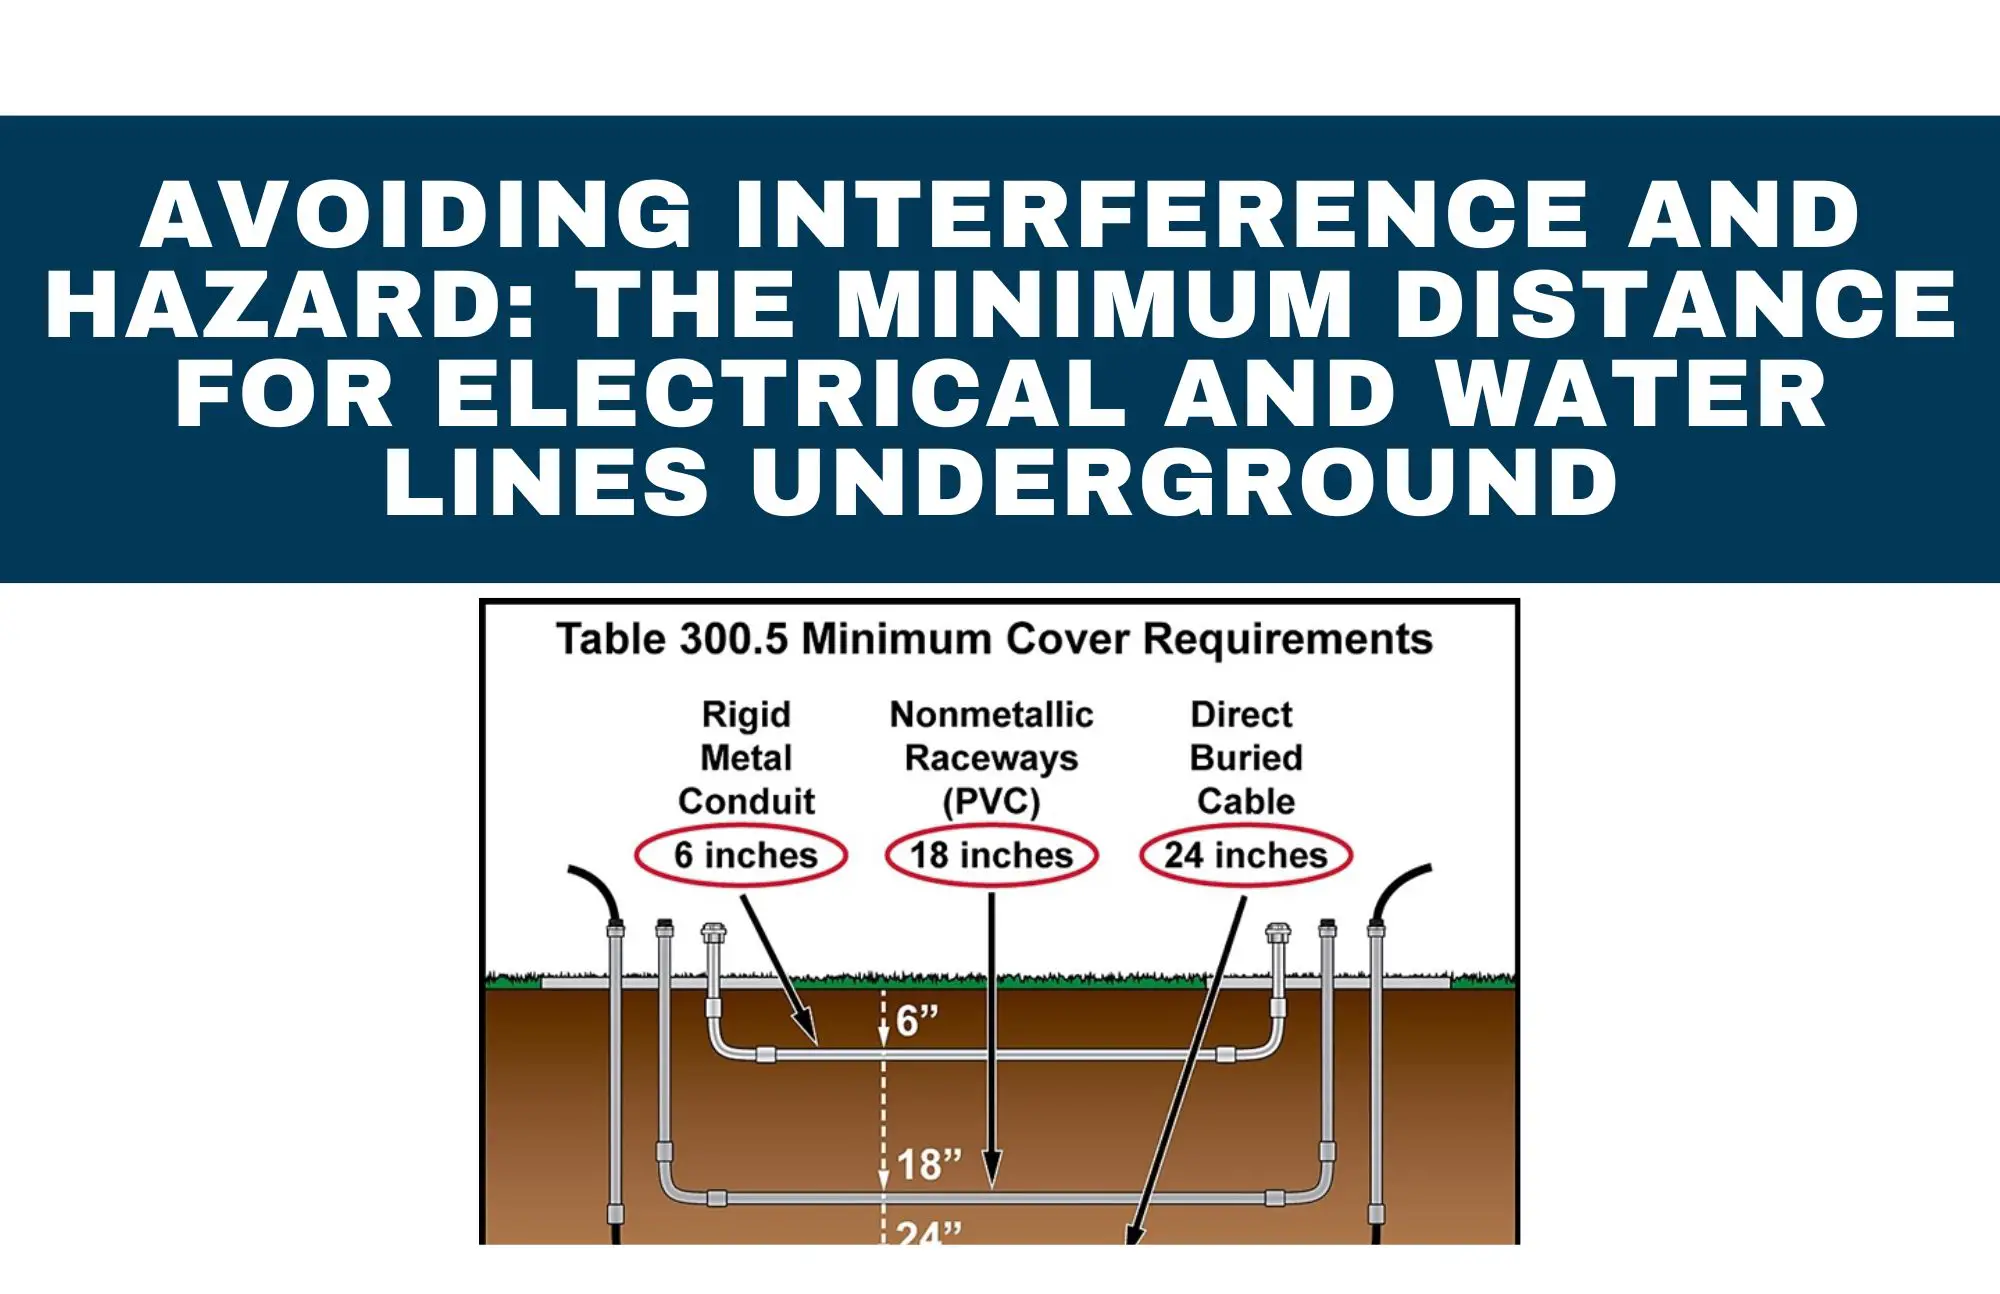 Minimum Distance for Electrical and Water Lines Underground